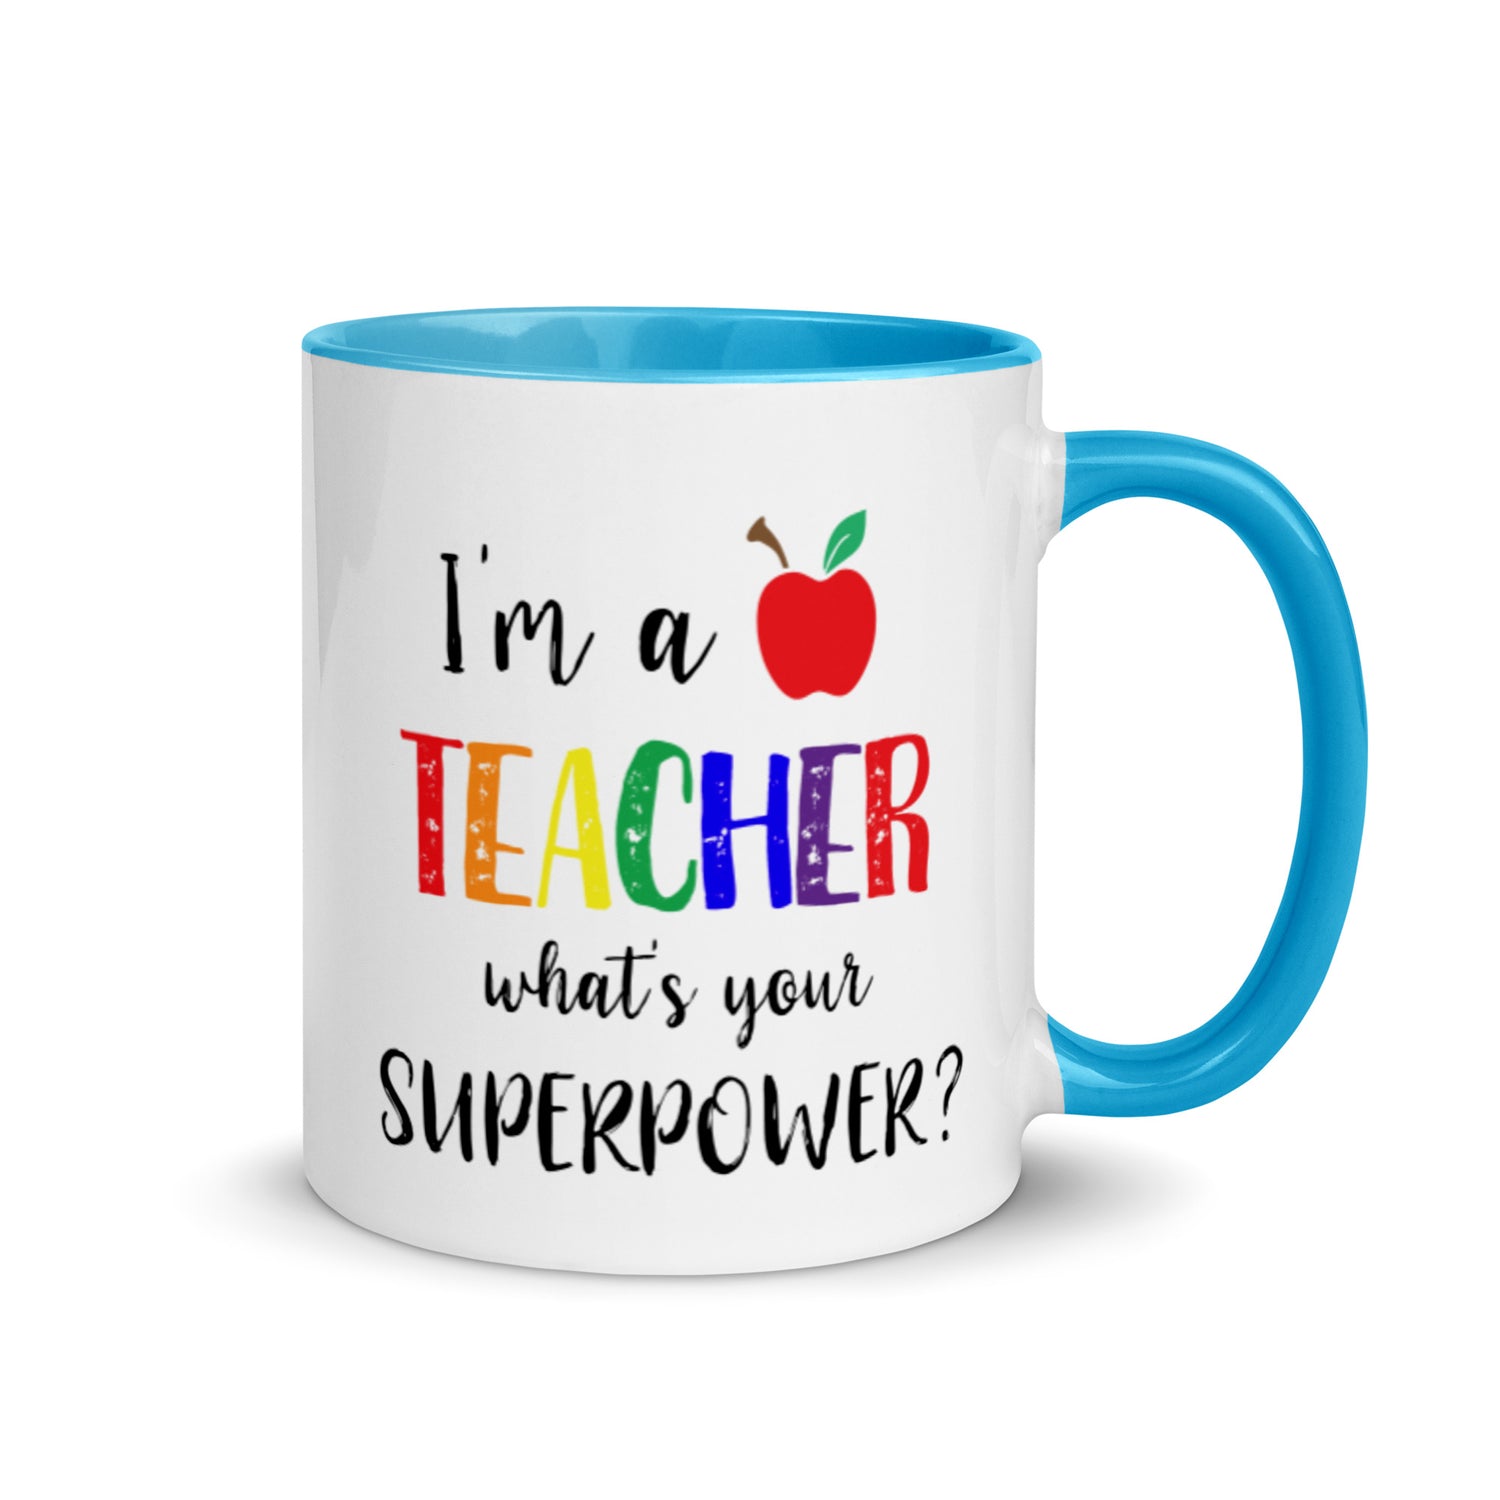 I'm a teacher what's your superpower mug with teal interior